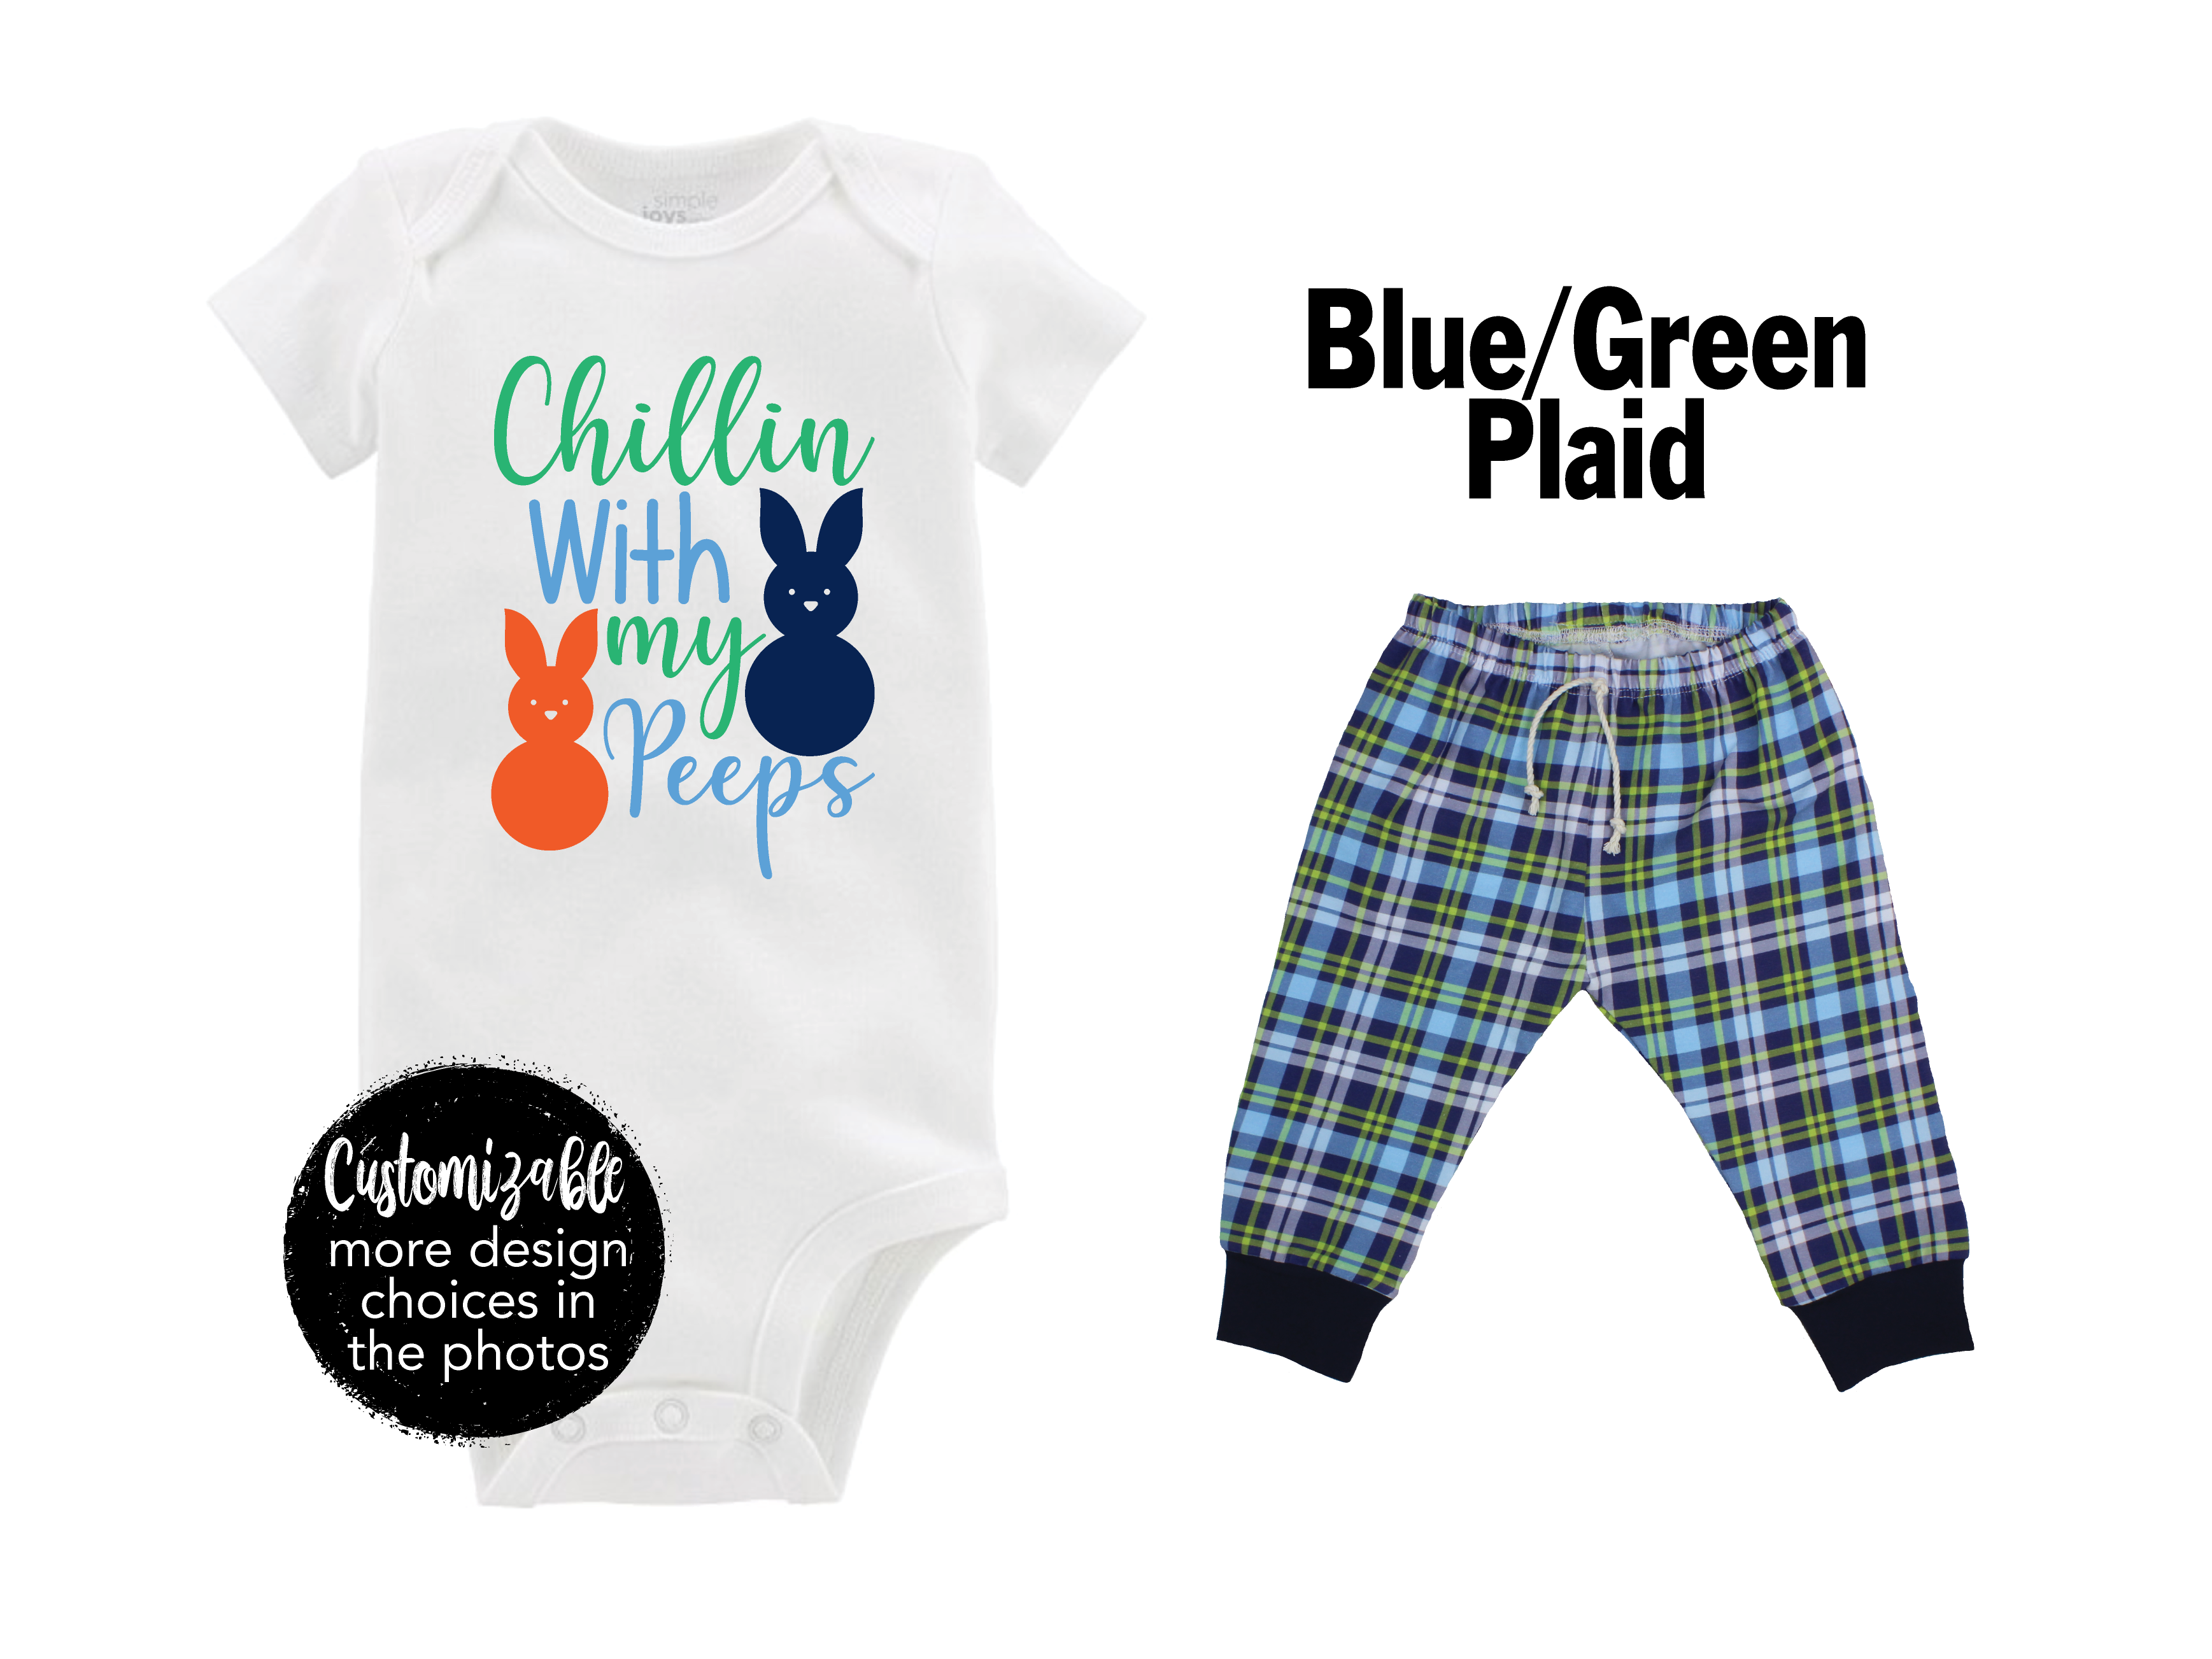 Easter Digger Outfit Stripe Pant Backhoe Egg Baby Boy Outfit